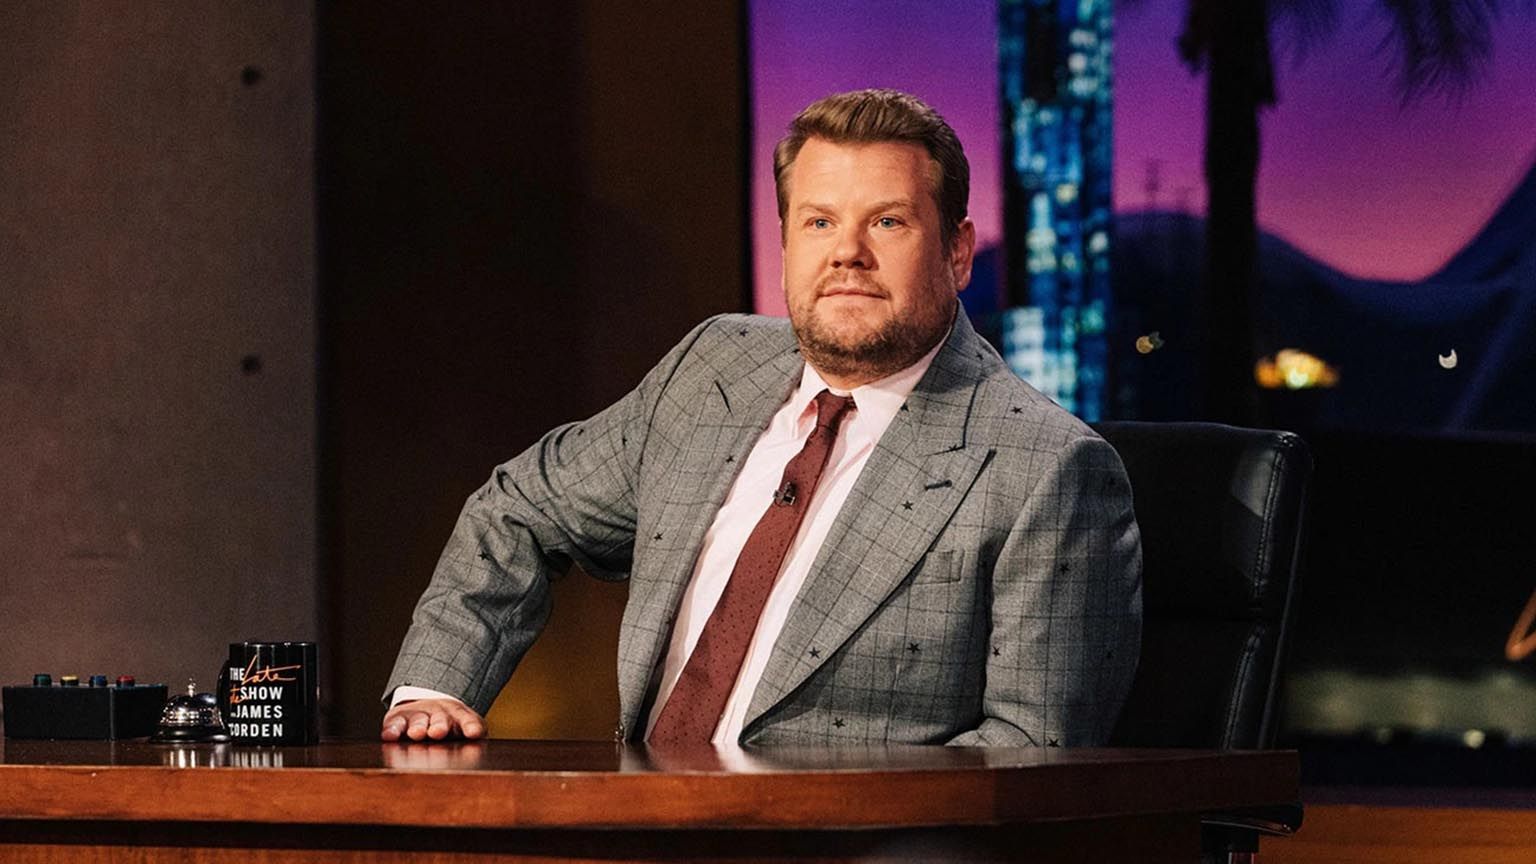 James Corden to exit “The Late Late Show” in 2023 photo The Hollywood Reporter